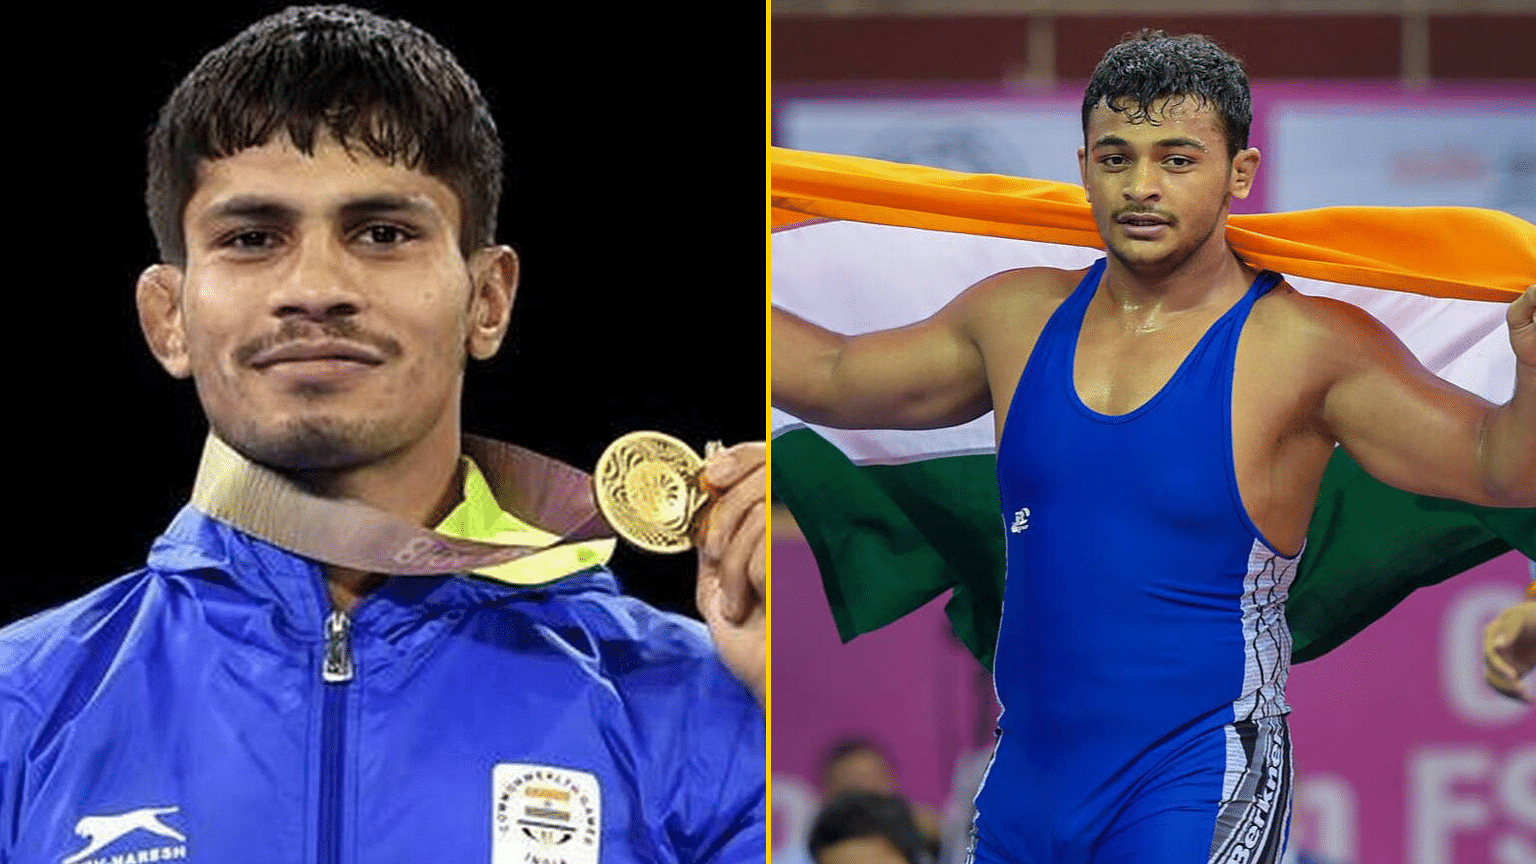 Rahul Aware (left) and Deepak Punia will be in action for India at Day 8 of World Wrestling Championships 2019.